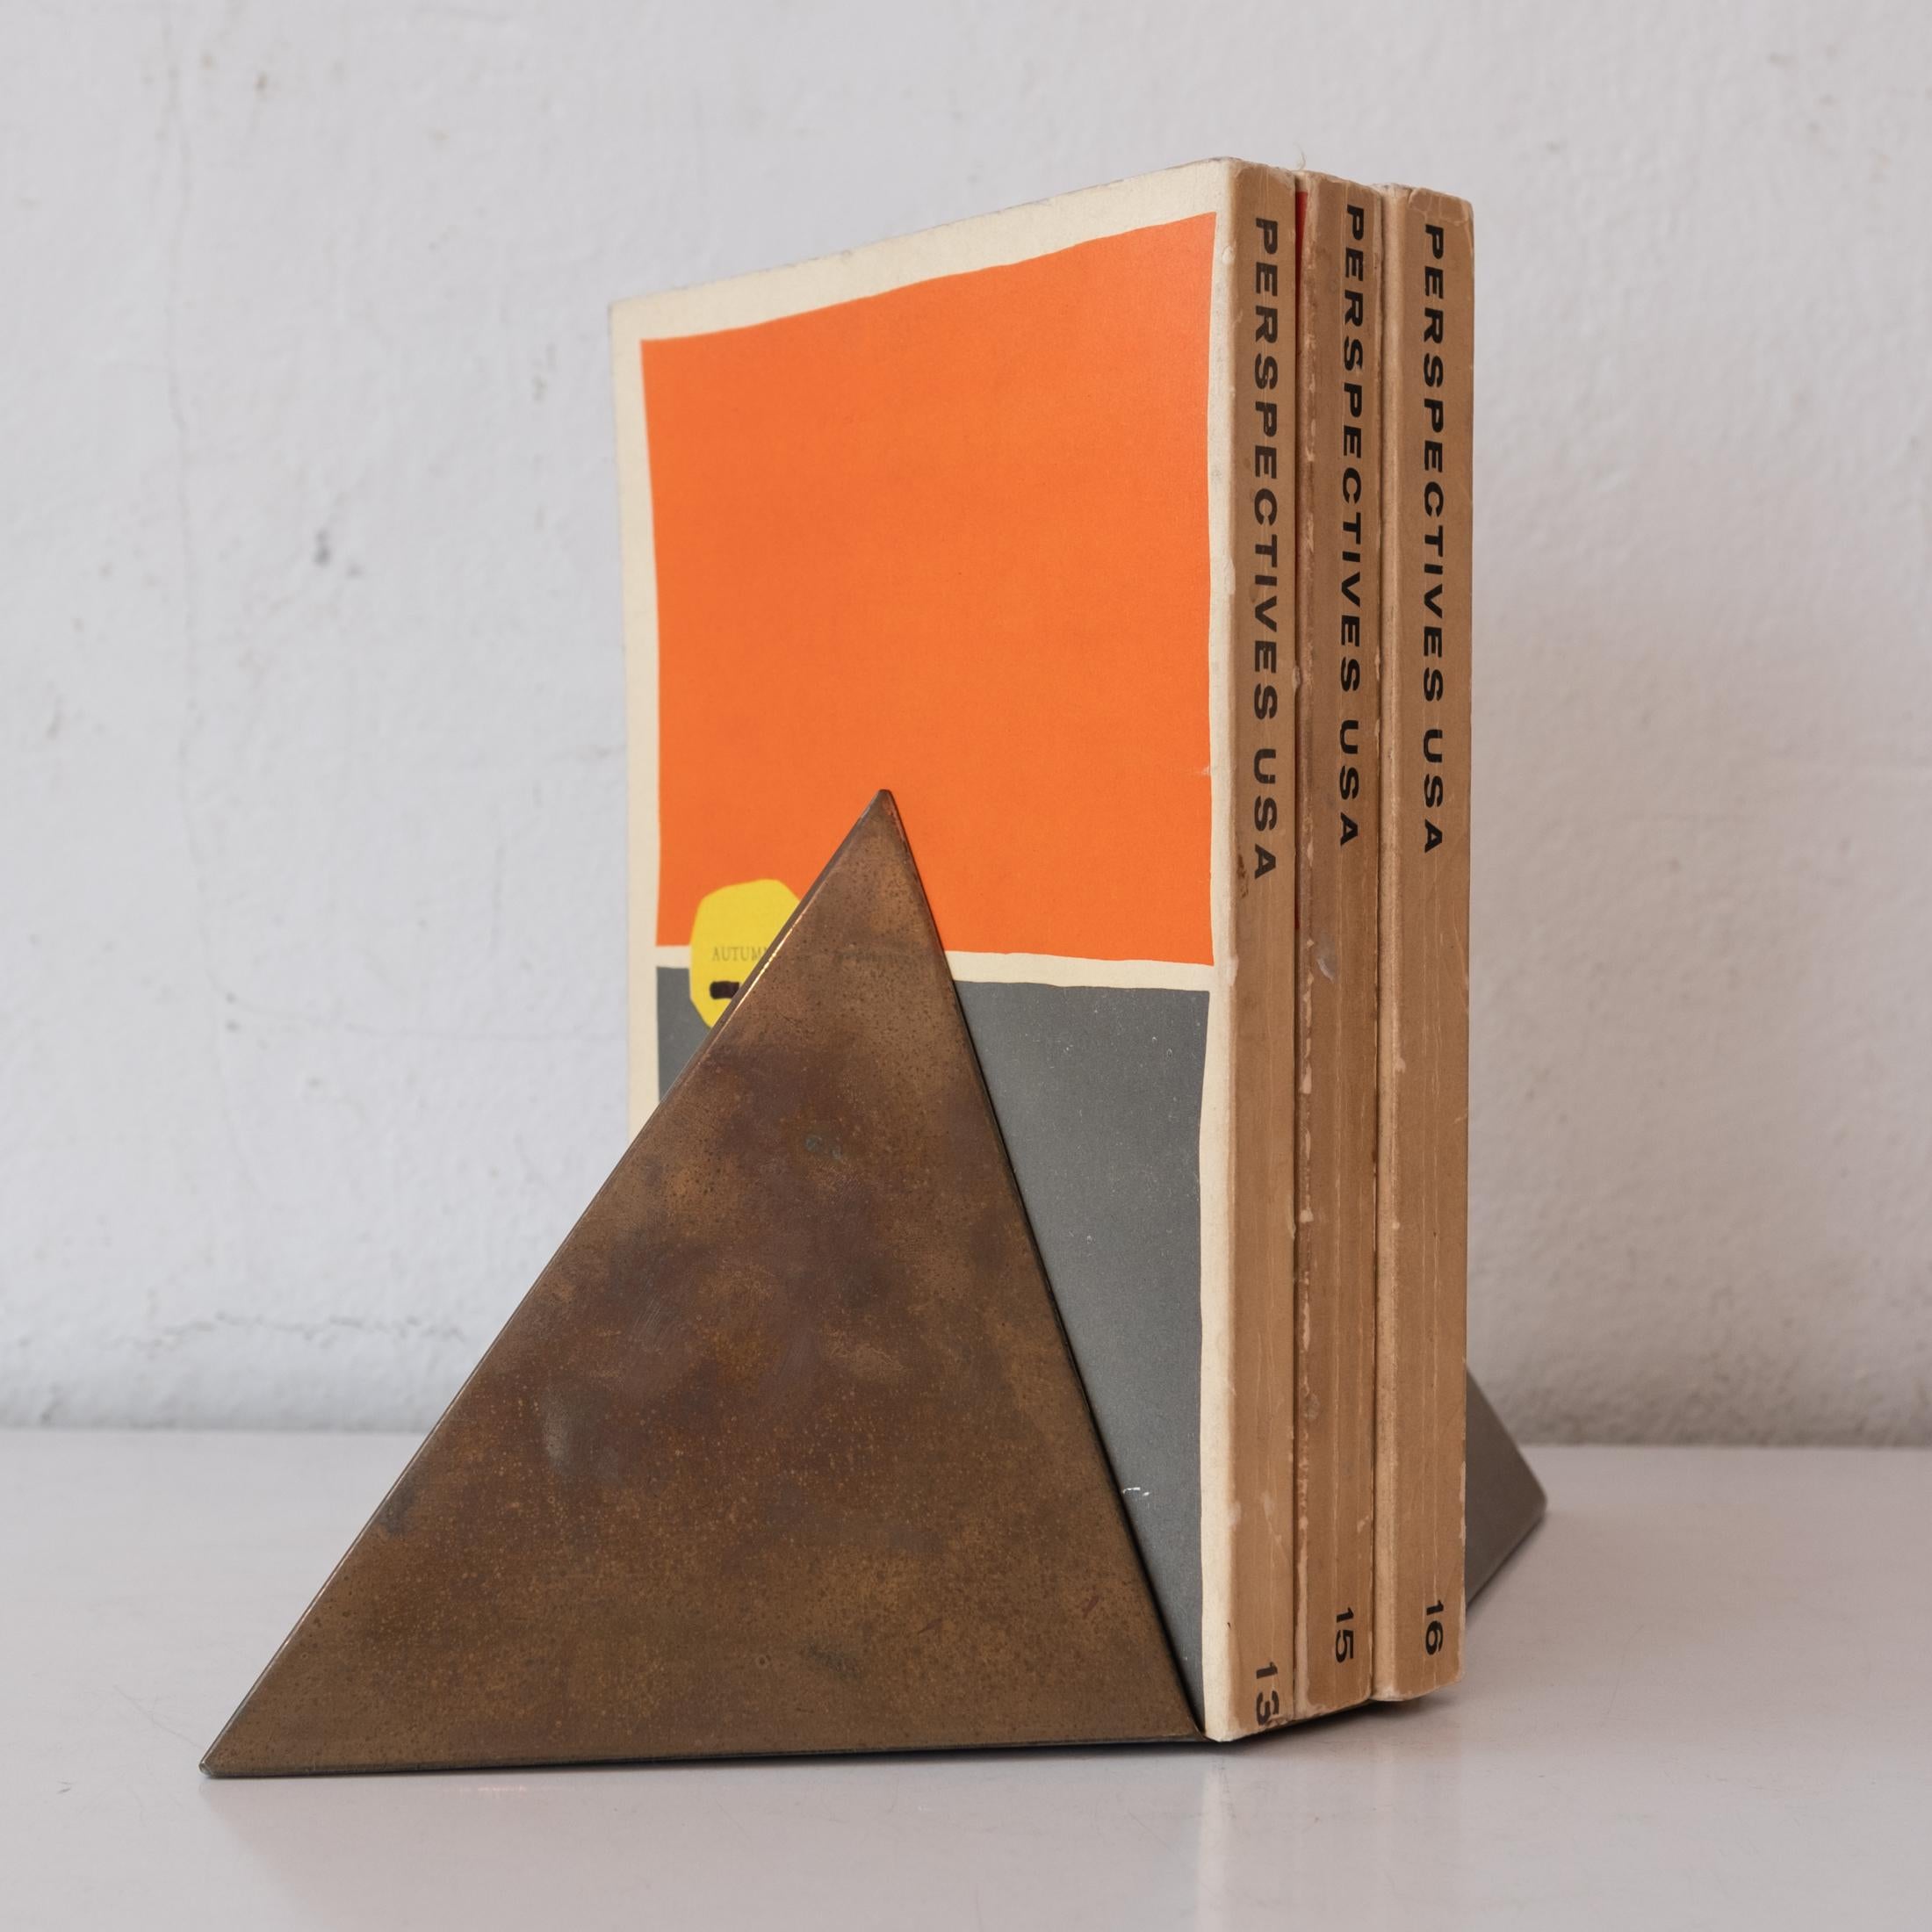 A great pair of geometric brass bookends from the 1970s.